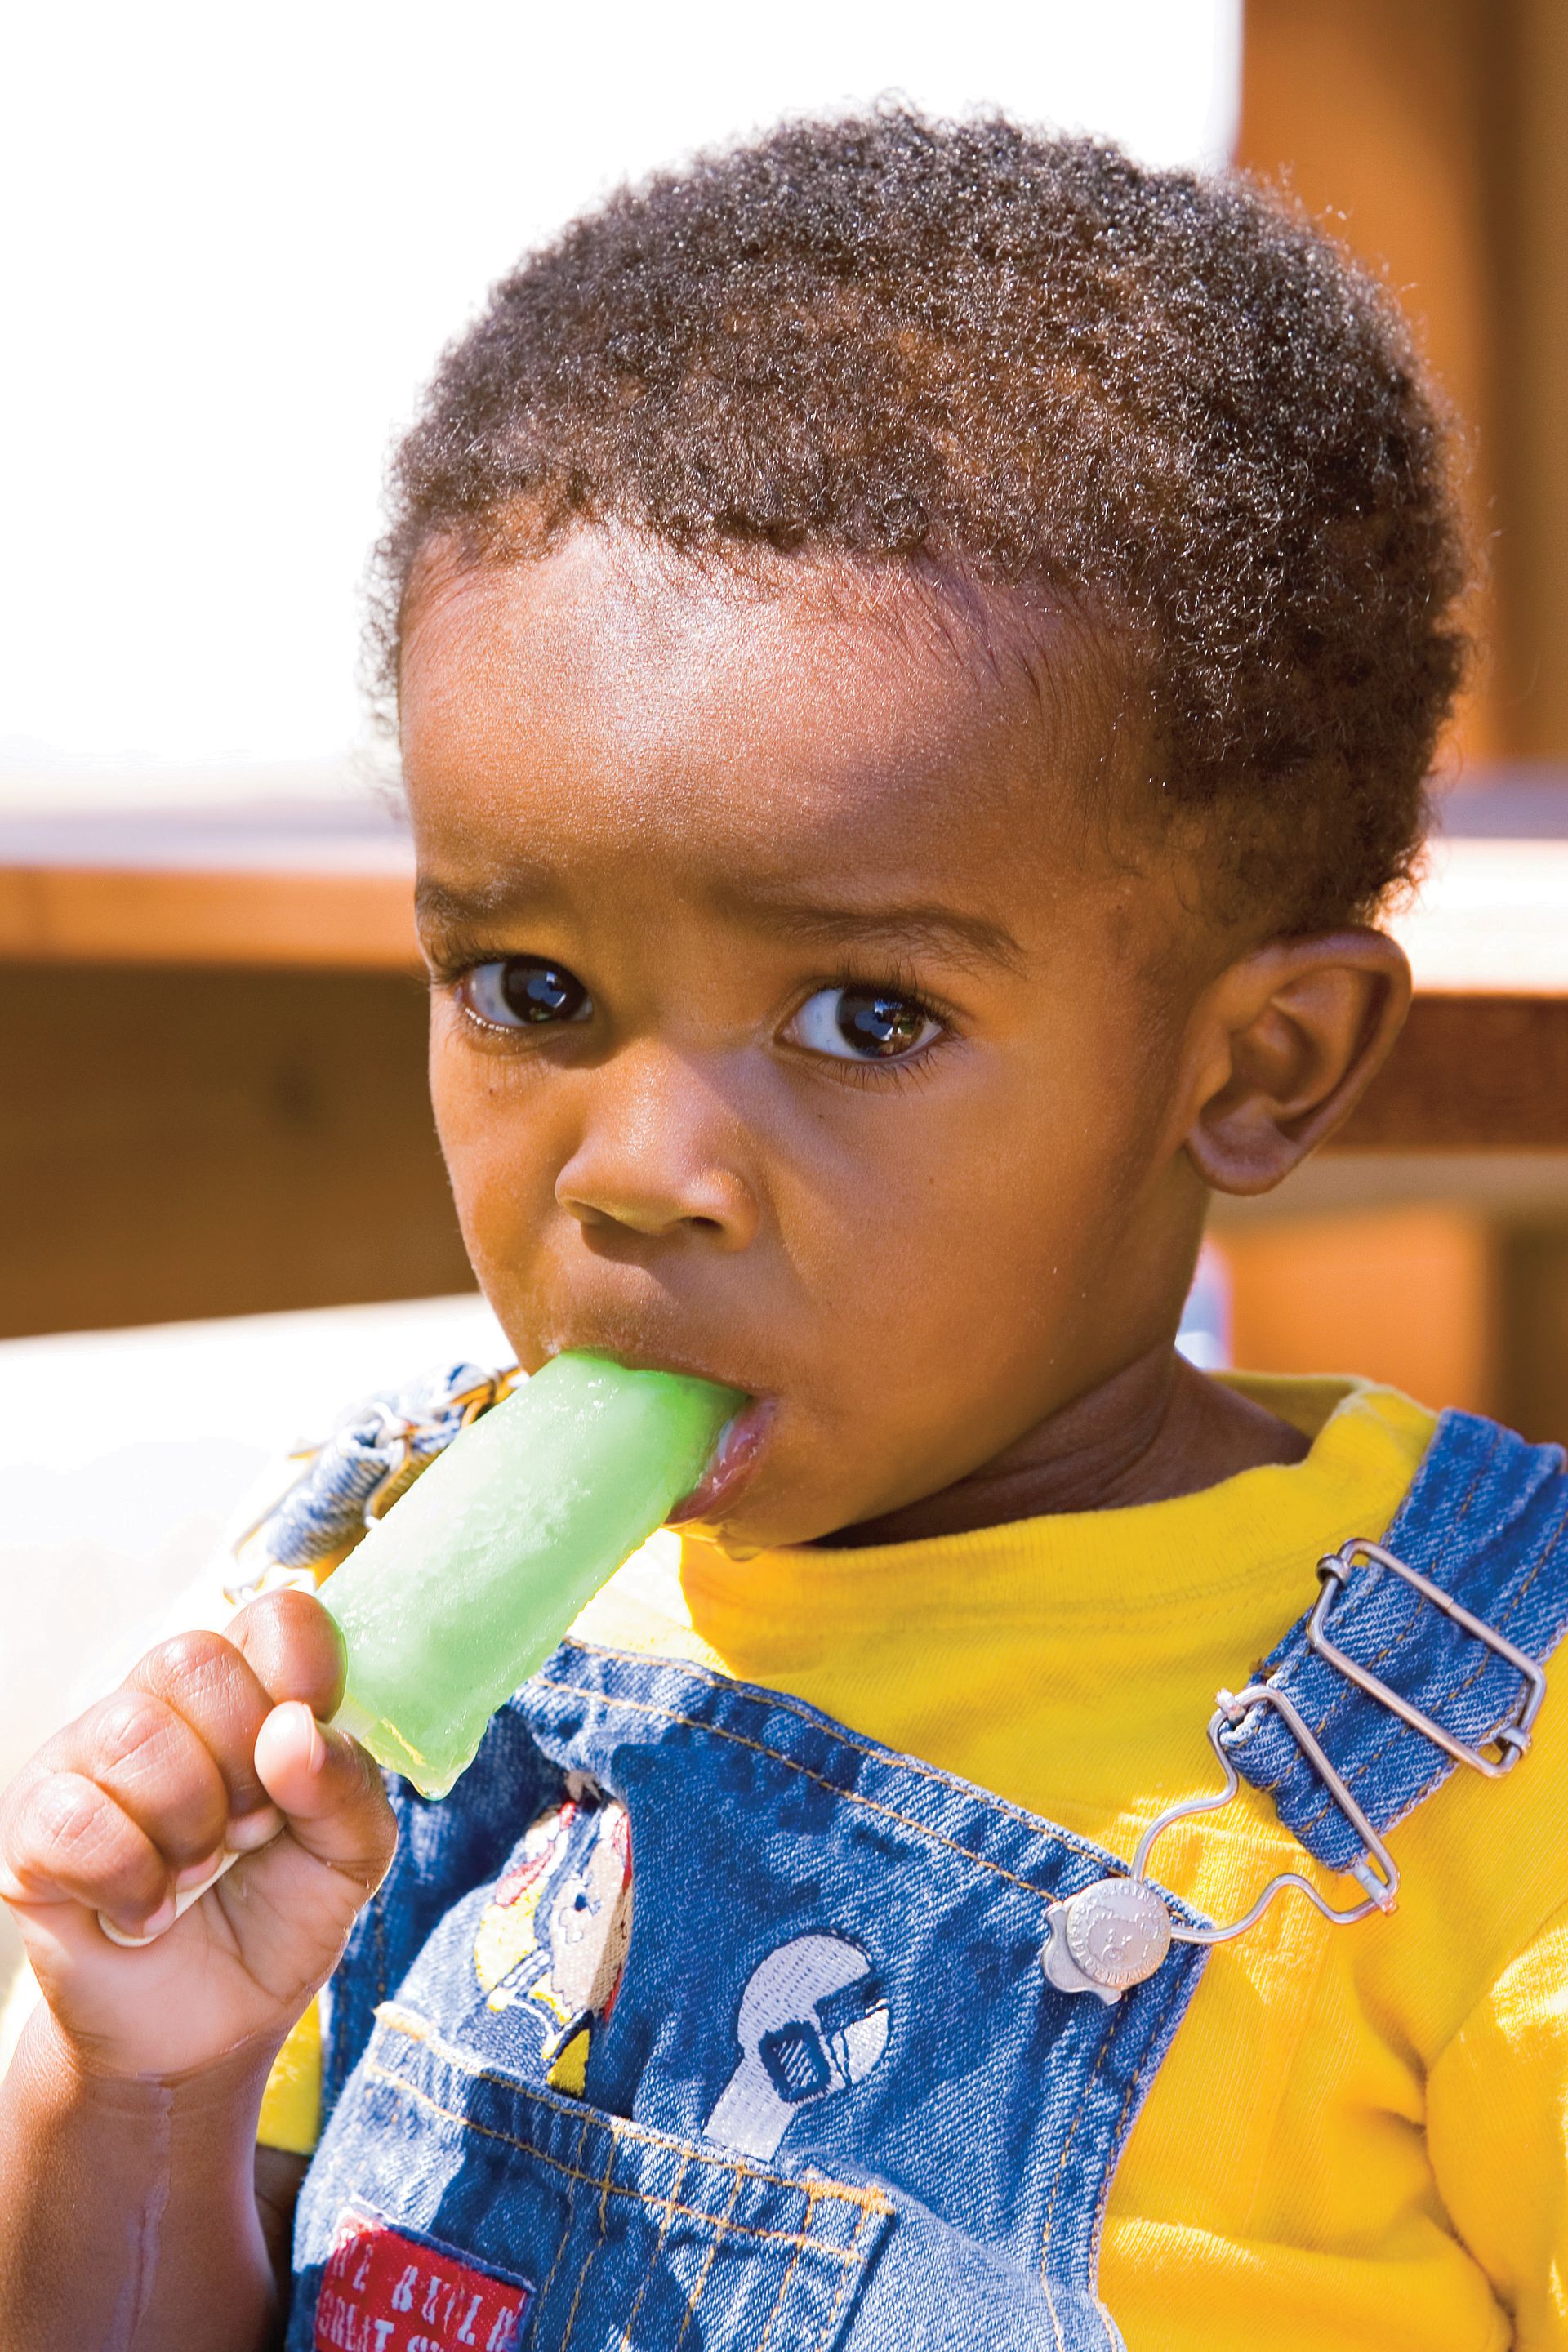 A toddler boy eating a green Popsicle.